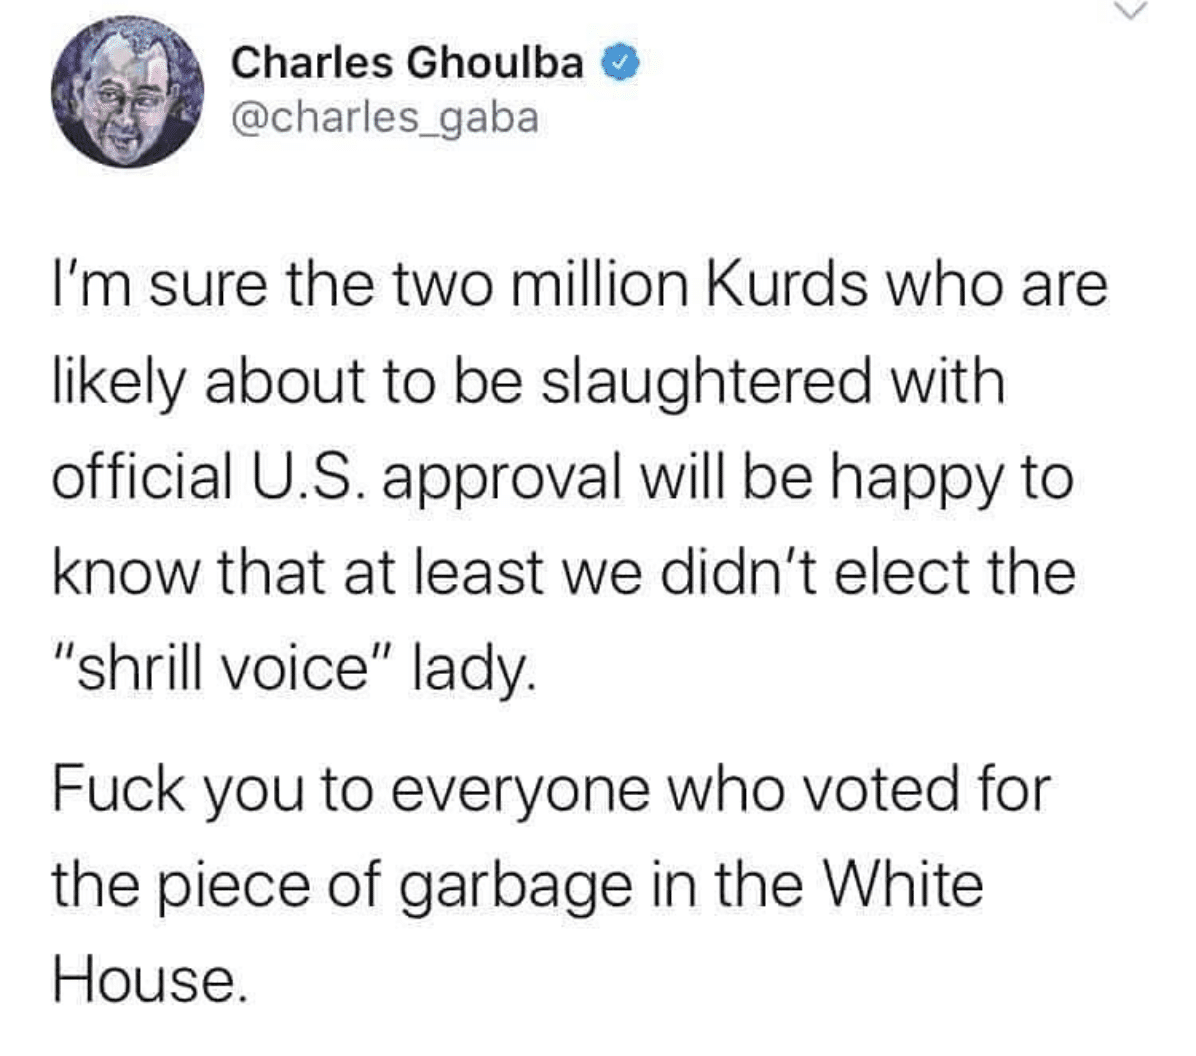 political political-memes political text: Charles Ghoulba @charles_gaba I'm sure the two million Kurds who are likely about to be slaughtered with official U.S. approval will be happy to know that at least we didn't elect the 